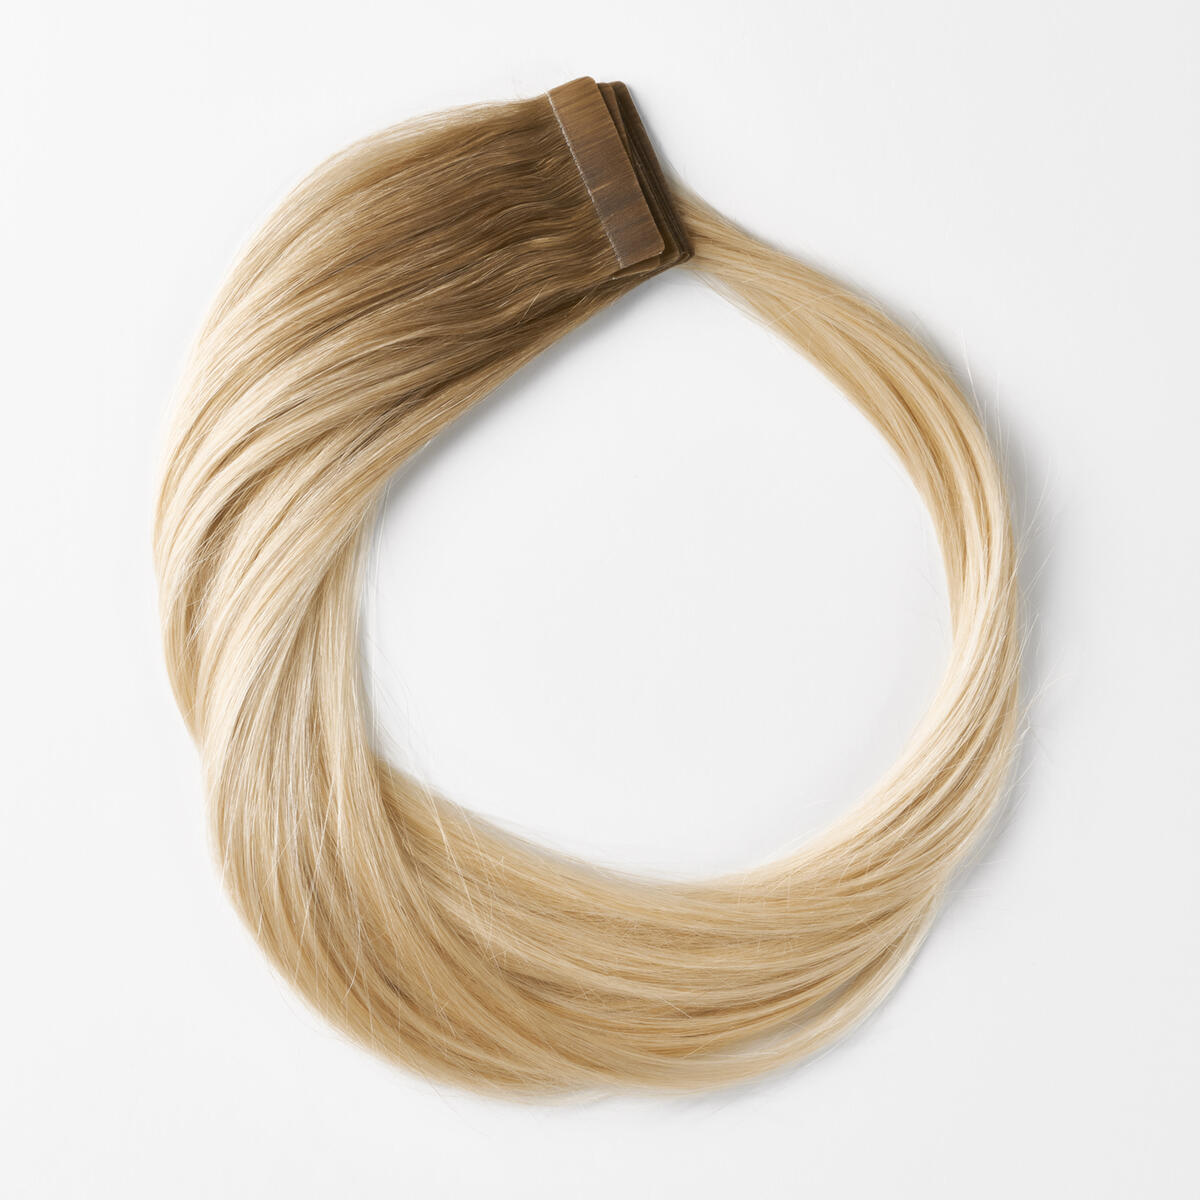 Basic Tape Extensions Classic 4